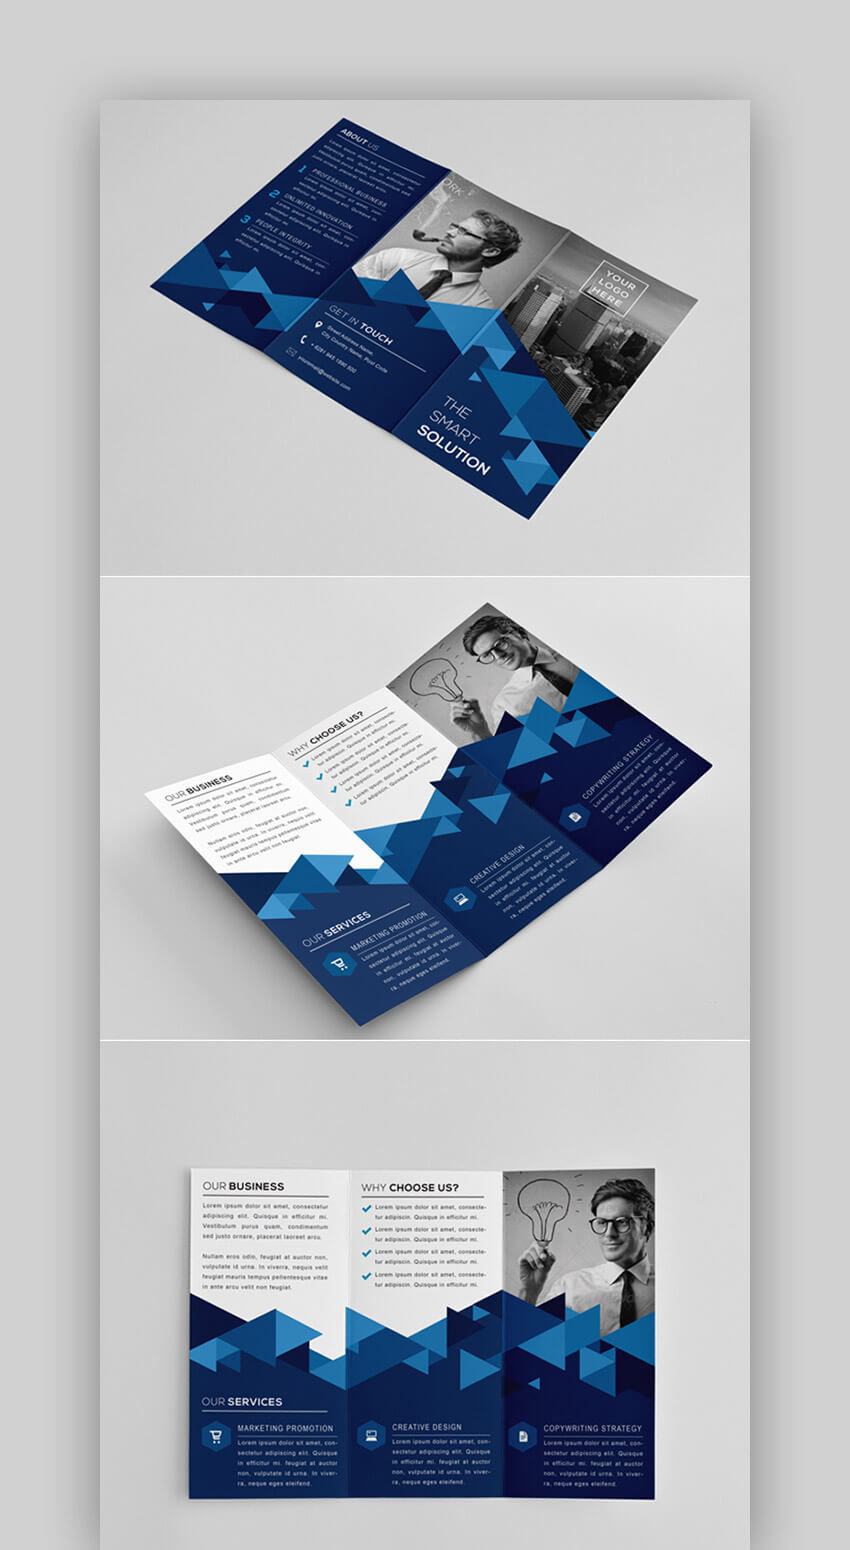 30 Best Indesign Brochure Templates – Creative Business Intended For Brochure Template Indesign Free Download